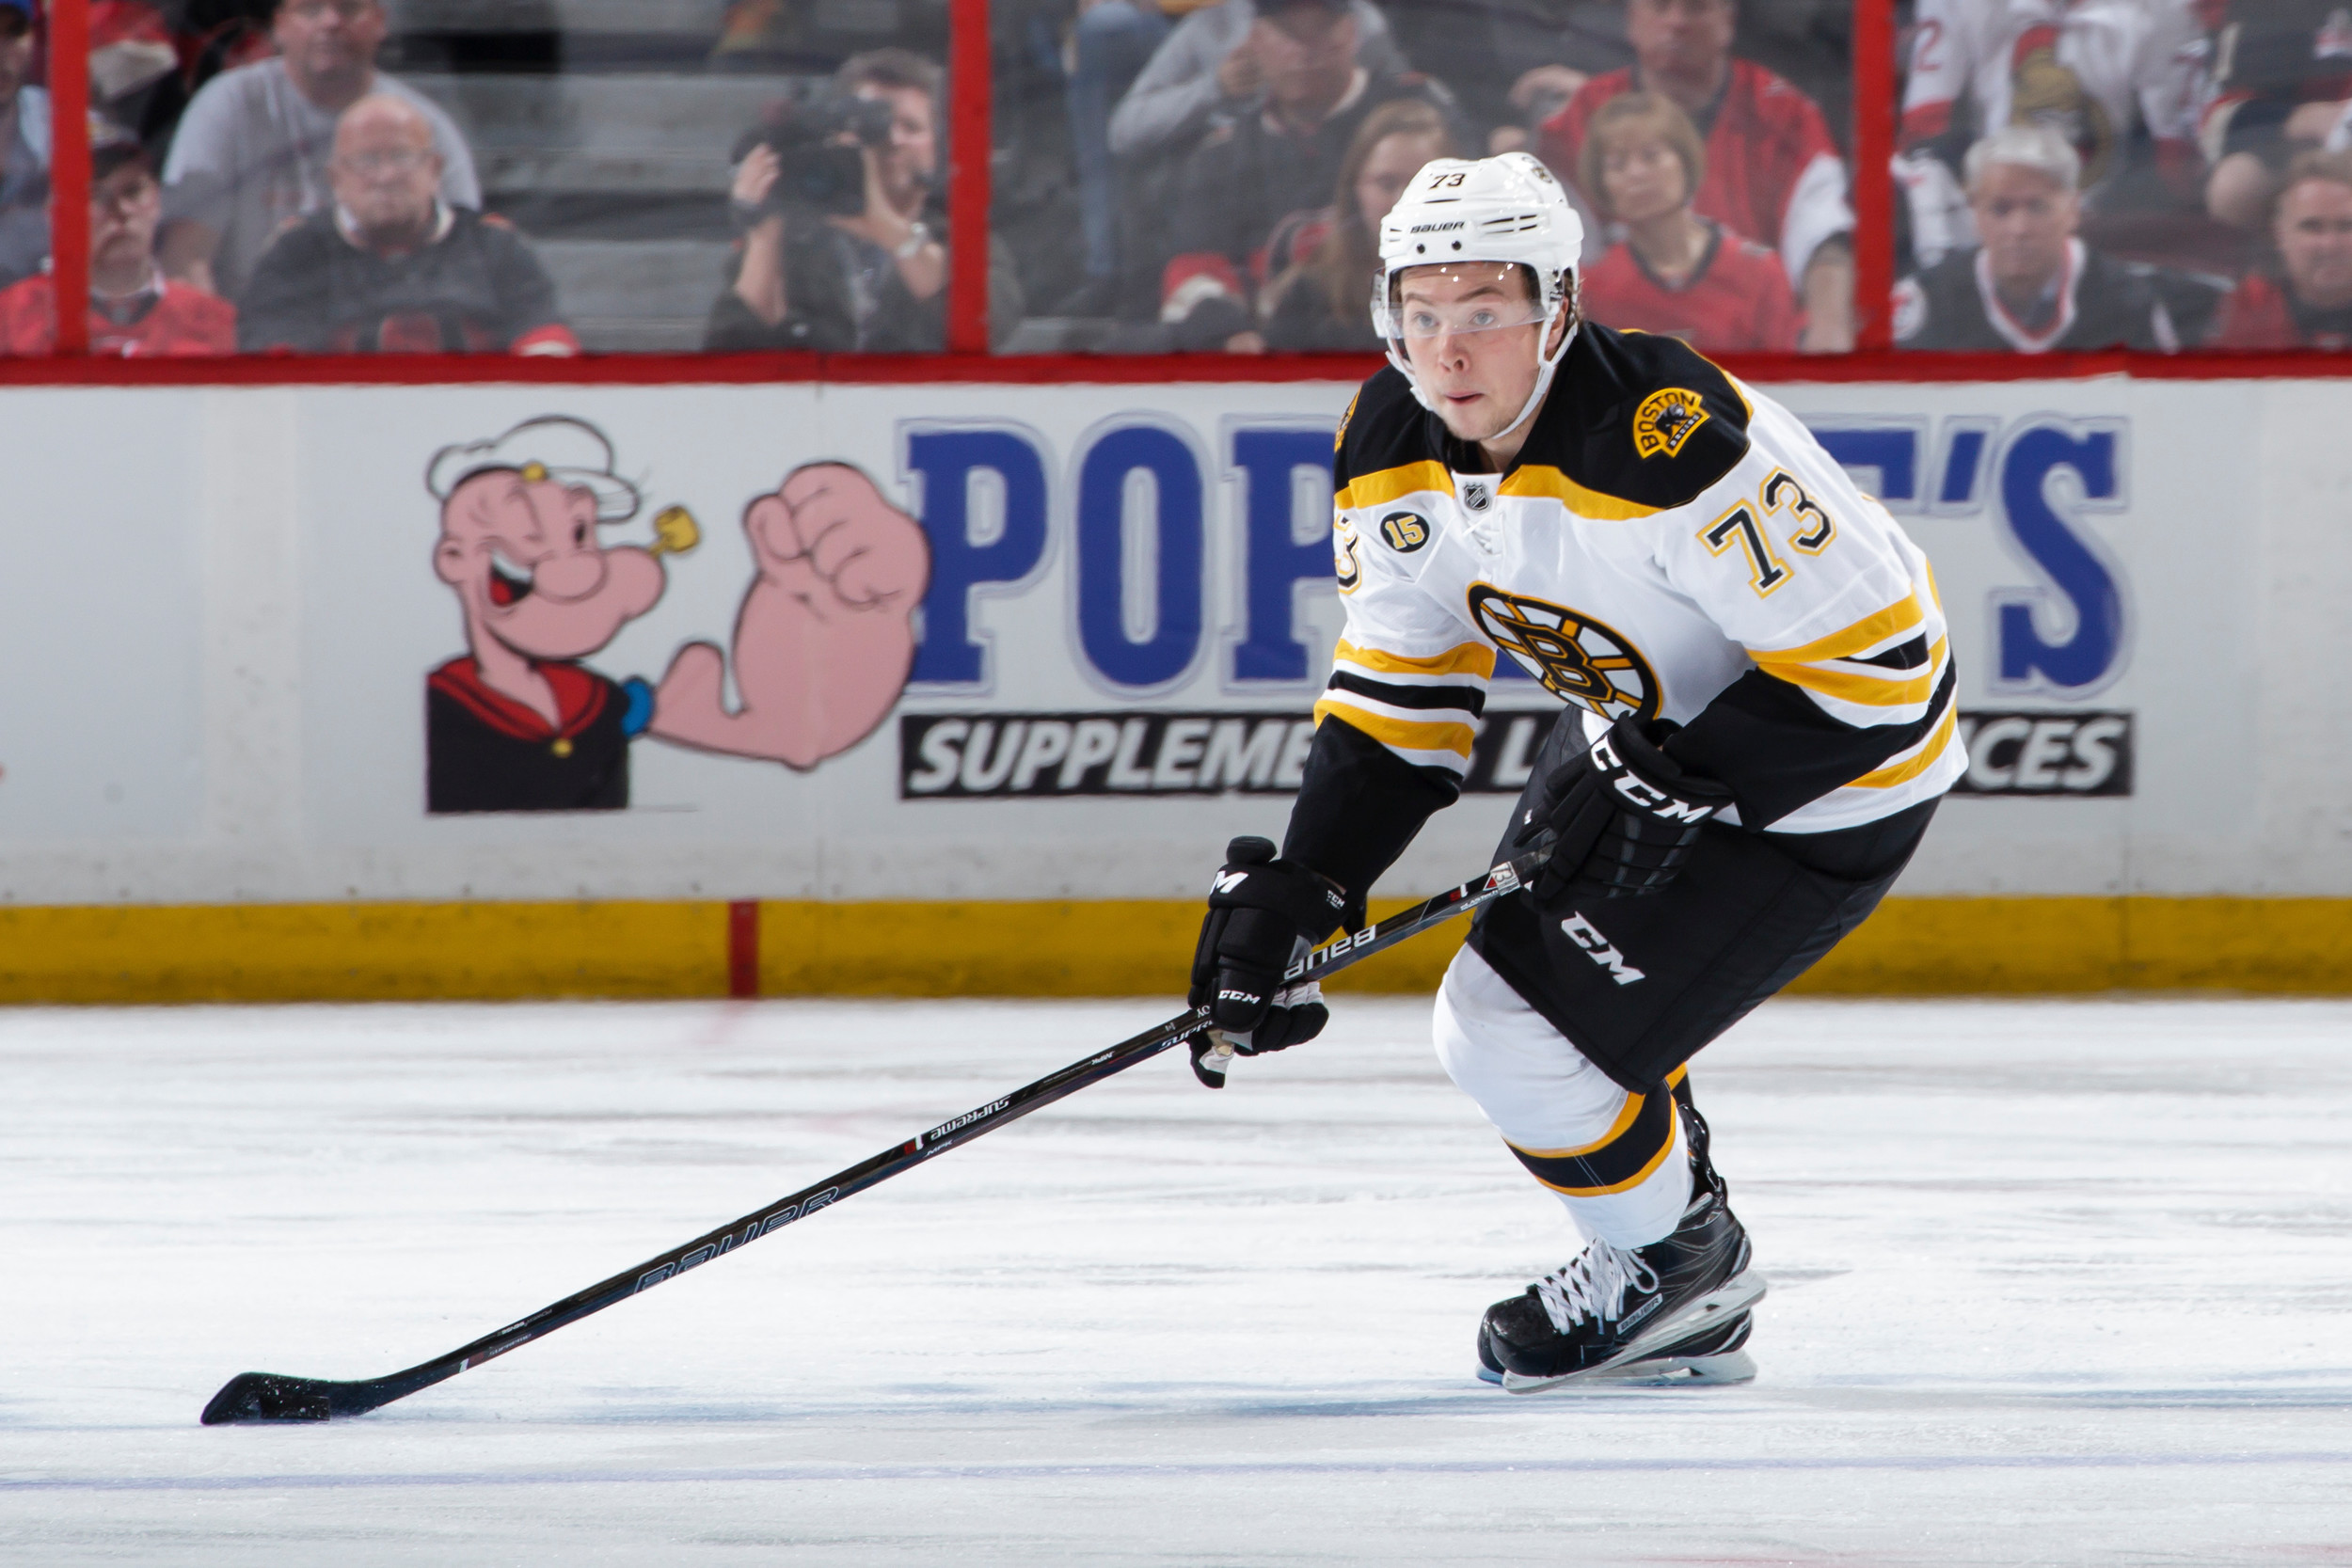 McAvoy selected in NHL draft  Herald Community Newspapers